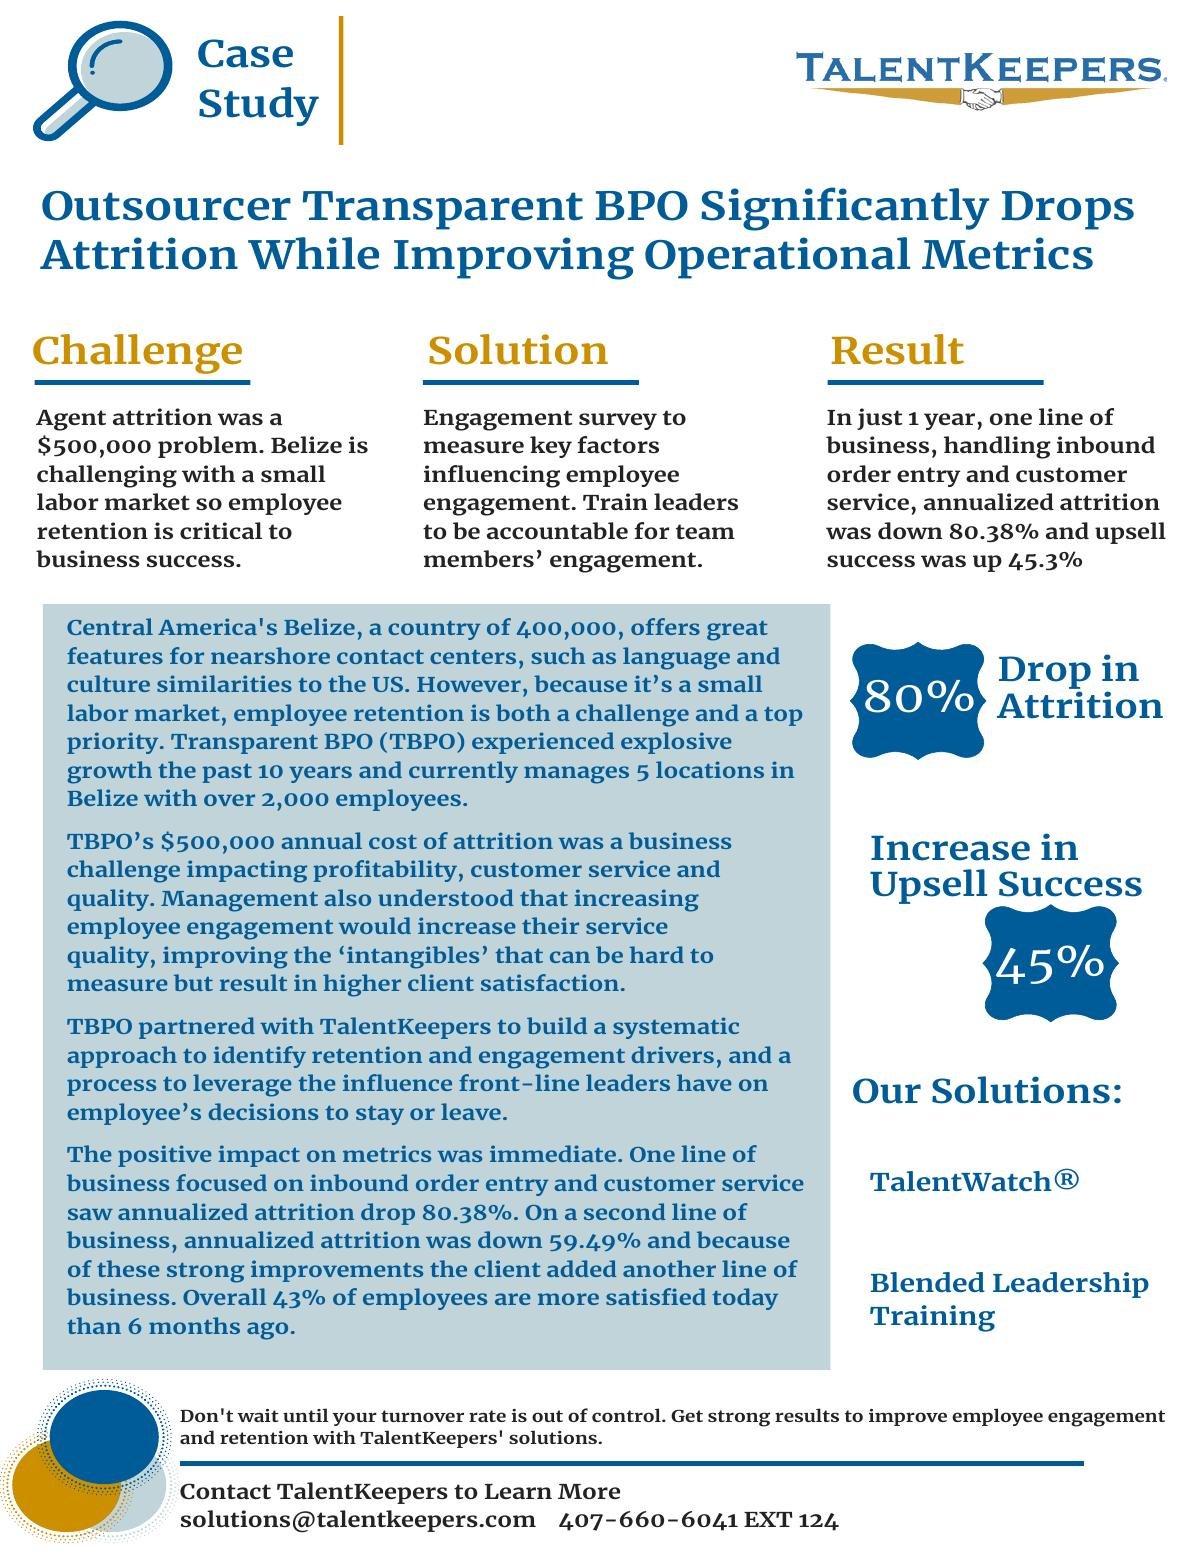 Outsourcer Transparent BPO Significantly Drops Attrition While Improving Operational Metrics